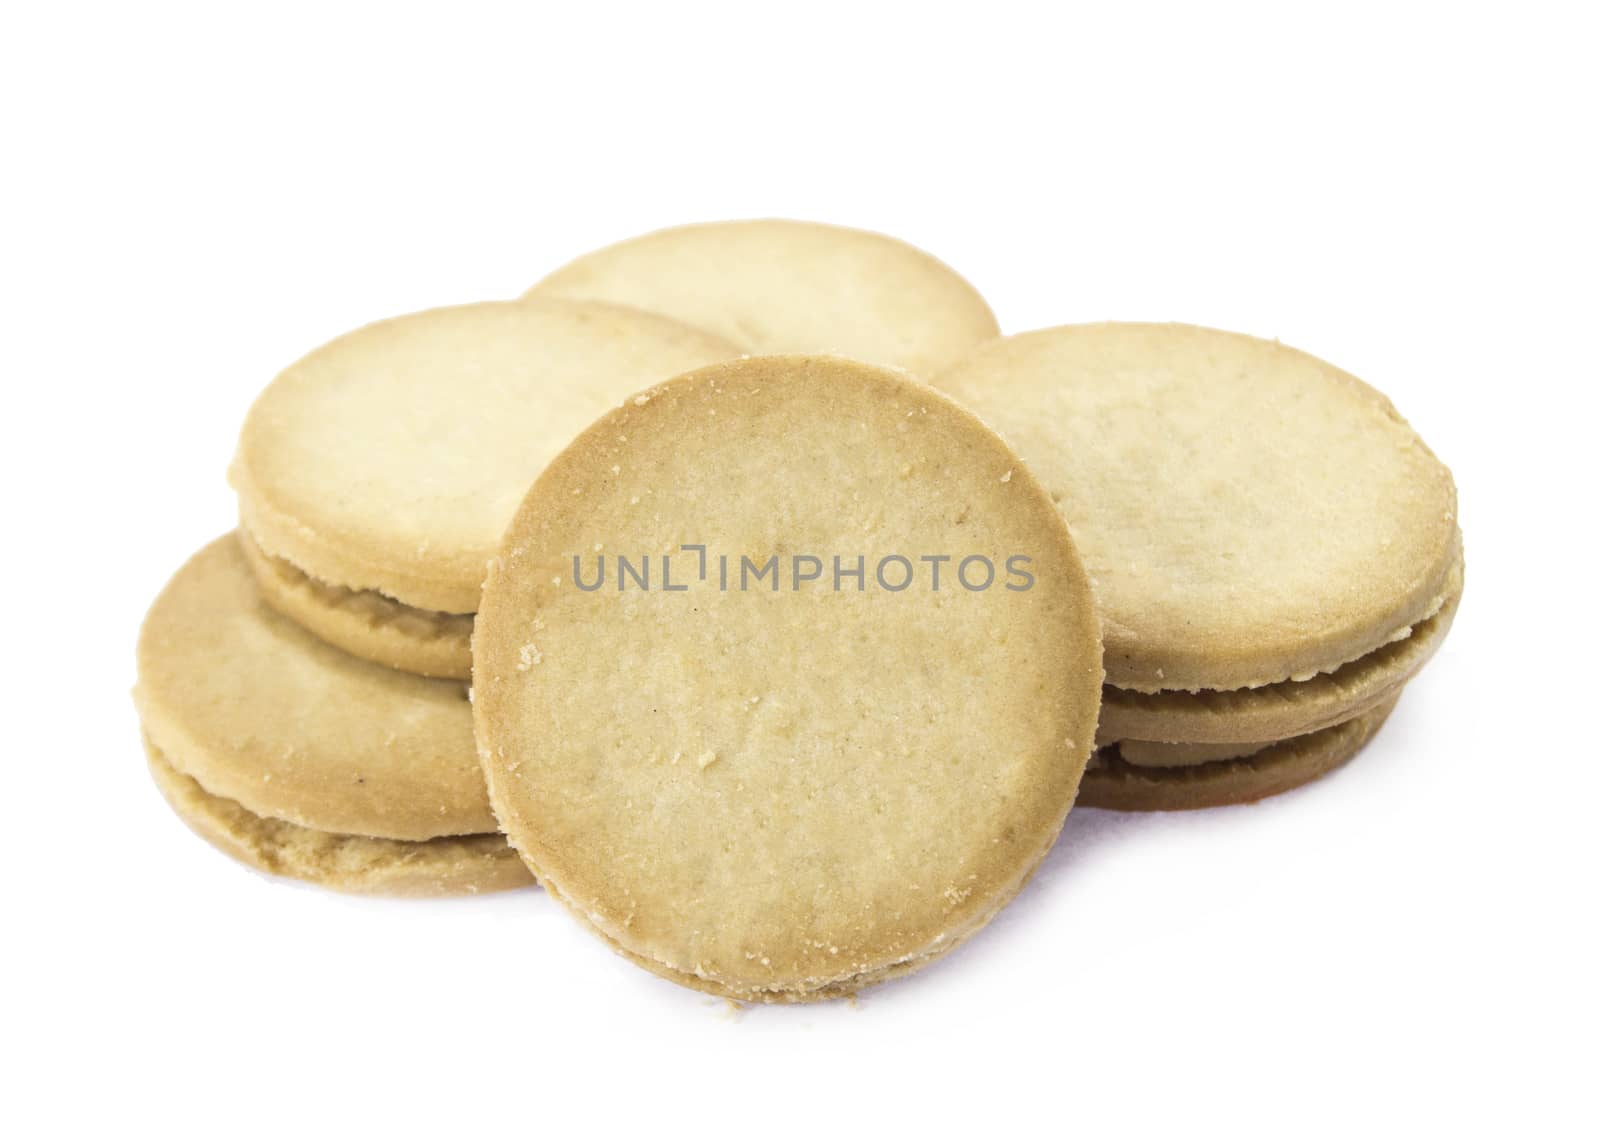 Sandwich biscuits, filled with chocolate, isolated on white background